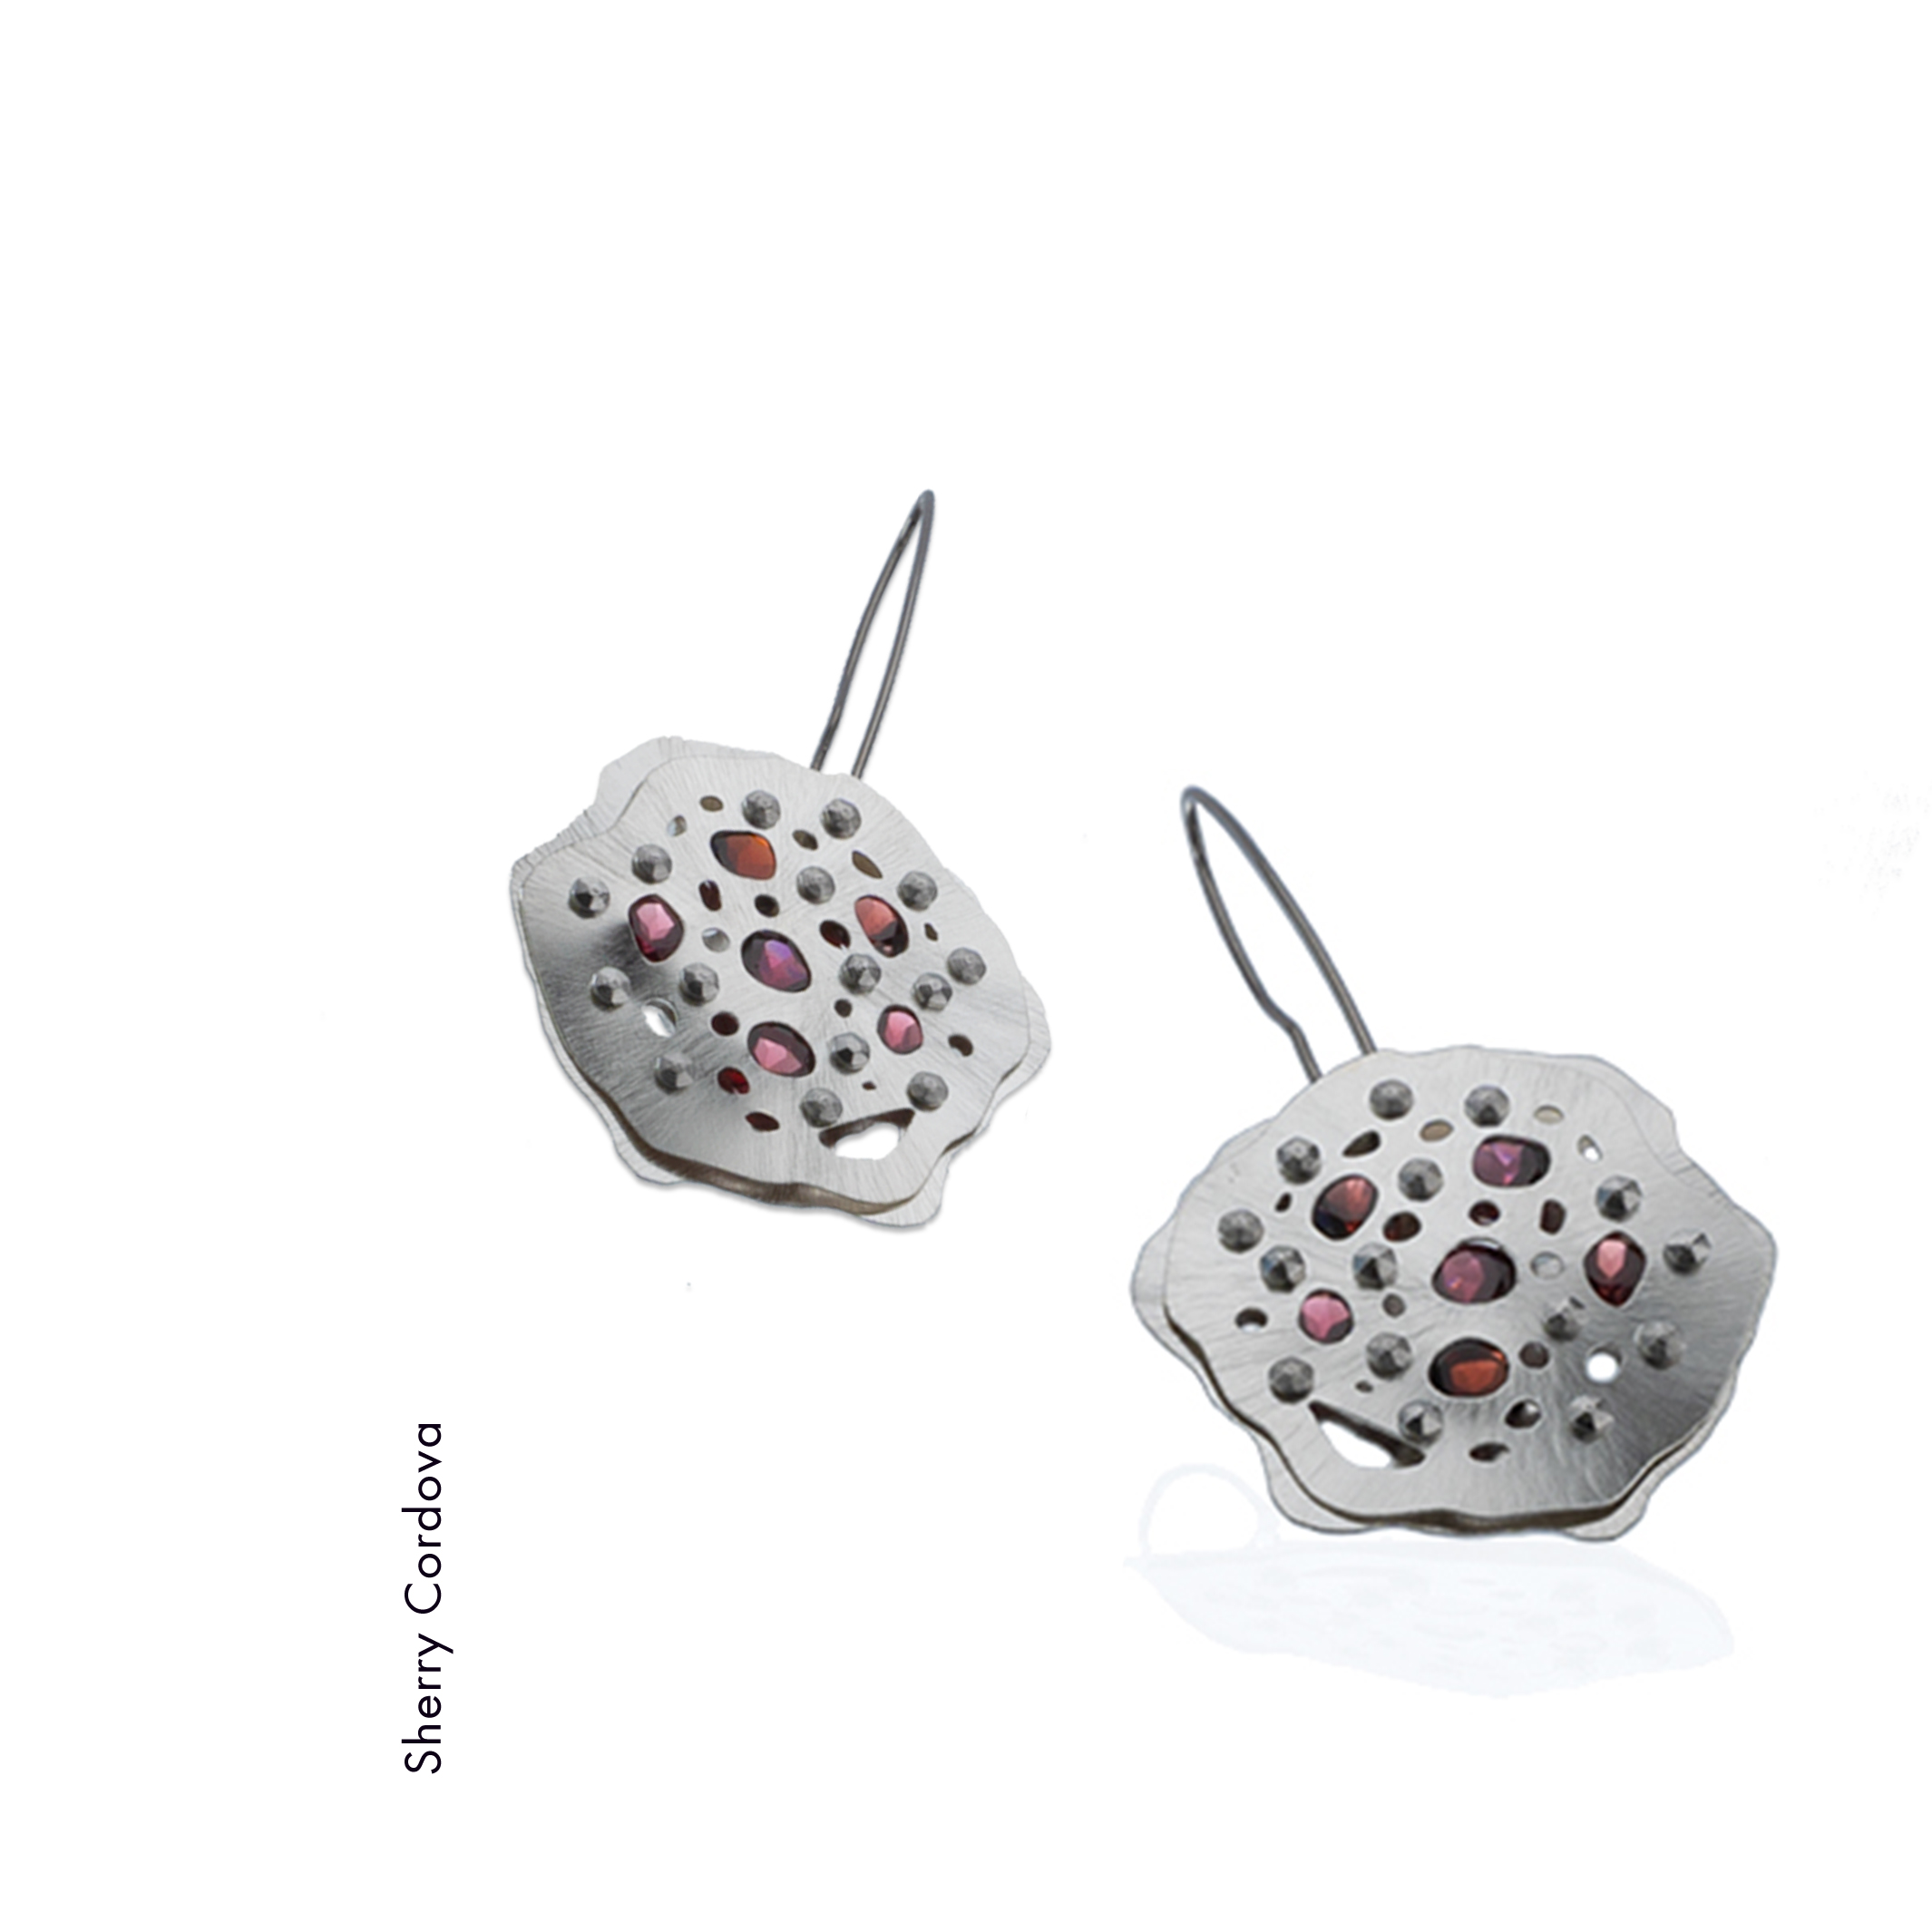 Sherry Cordova made these argentium sterling silver earrings which each contain 6 faceted garnets tension set between the two layers shaped like radiolaria. non allergenic niobium earwires finish the design